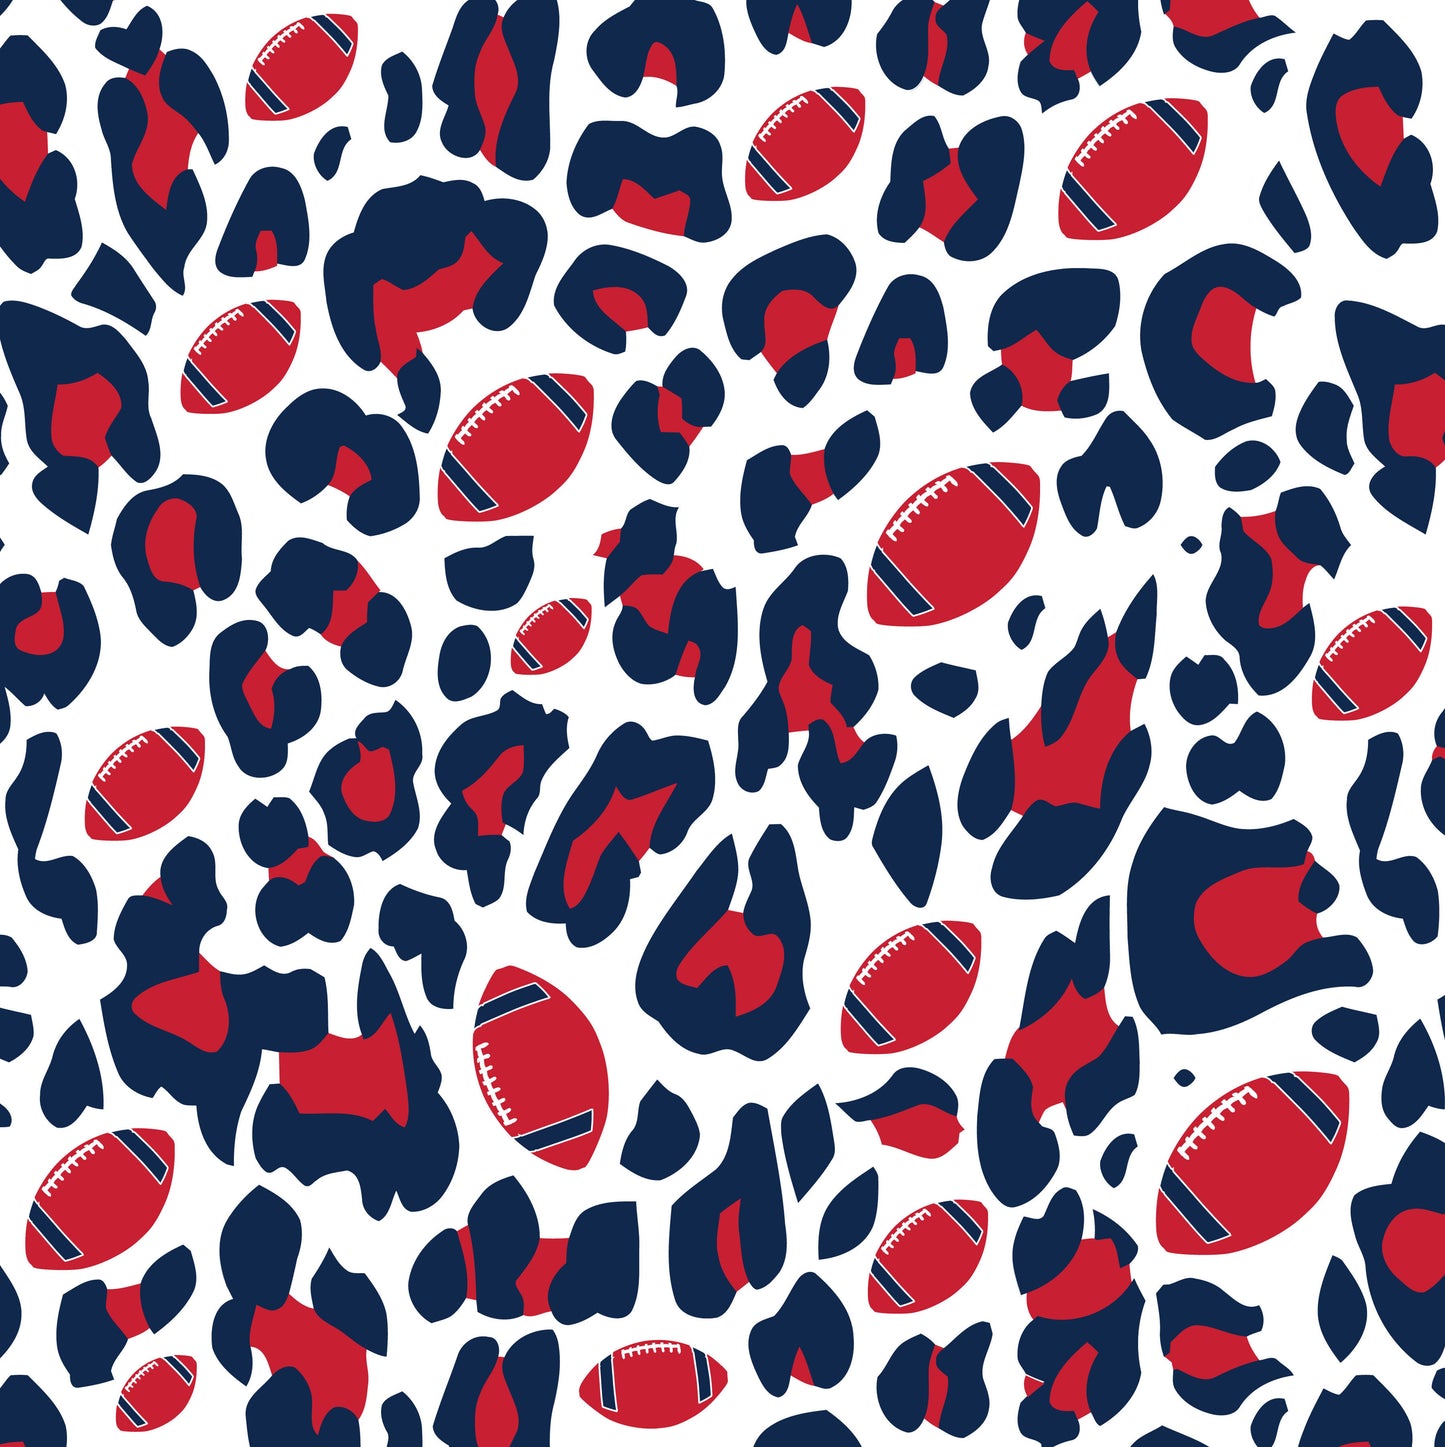 LEOPARD FOOTBALL PRINT - NAVY AND RED 4